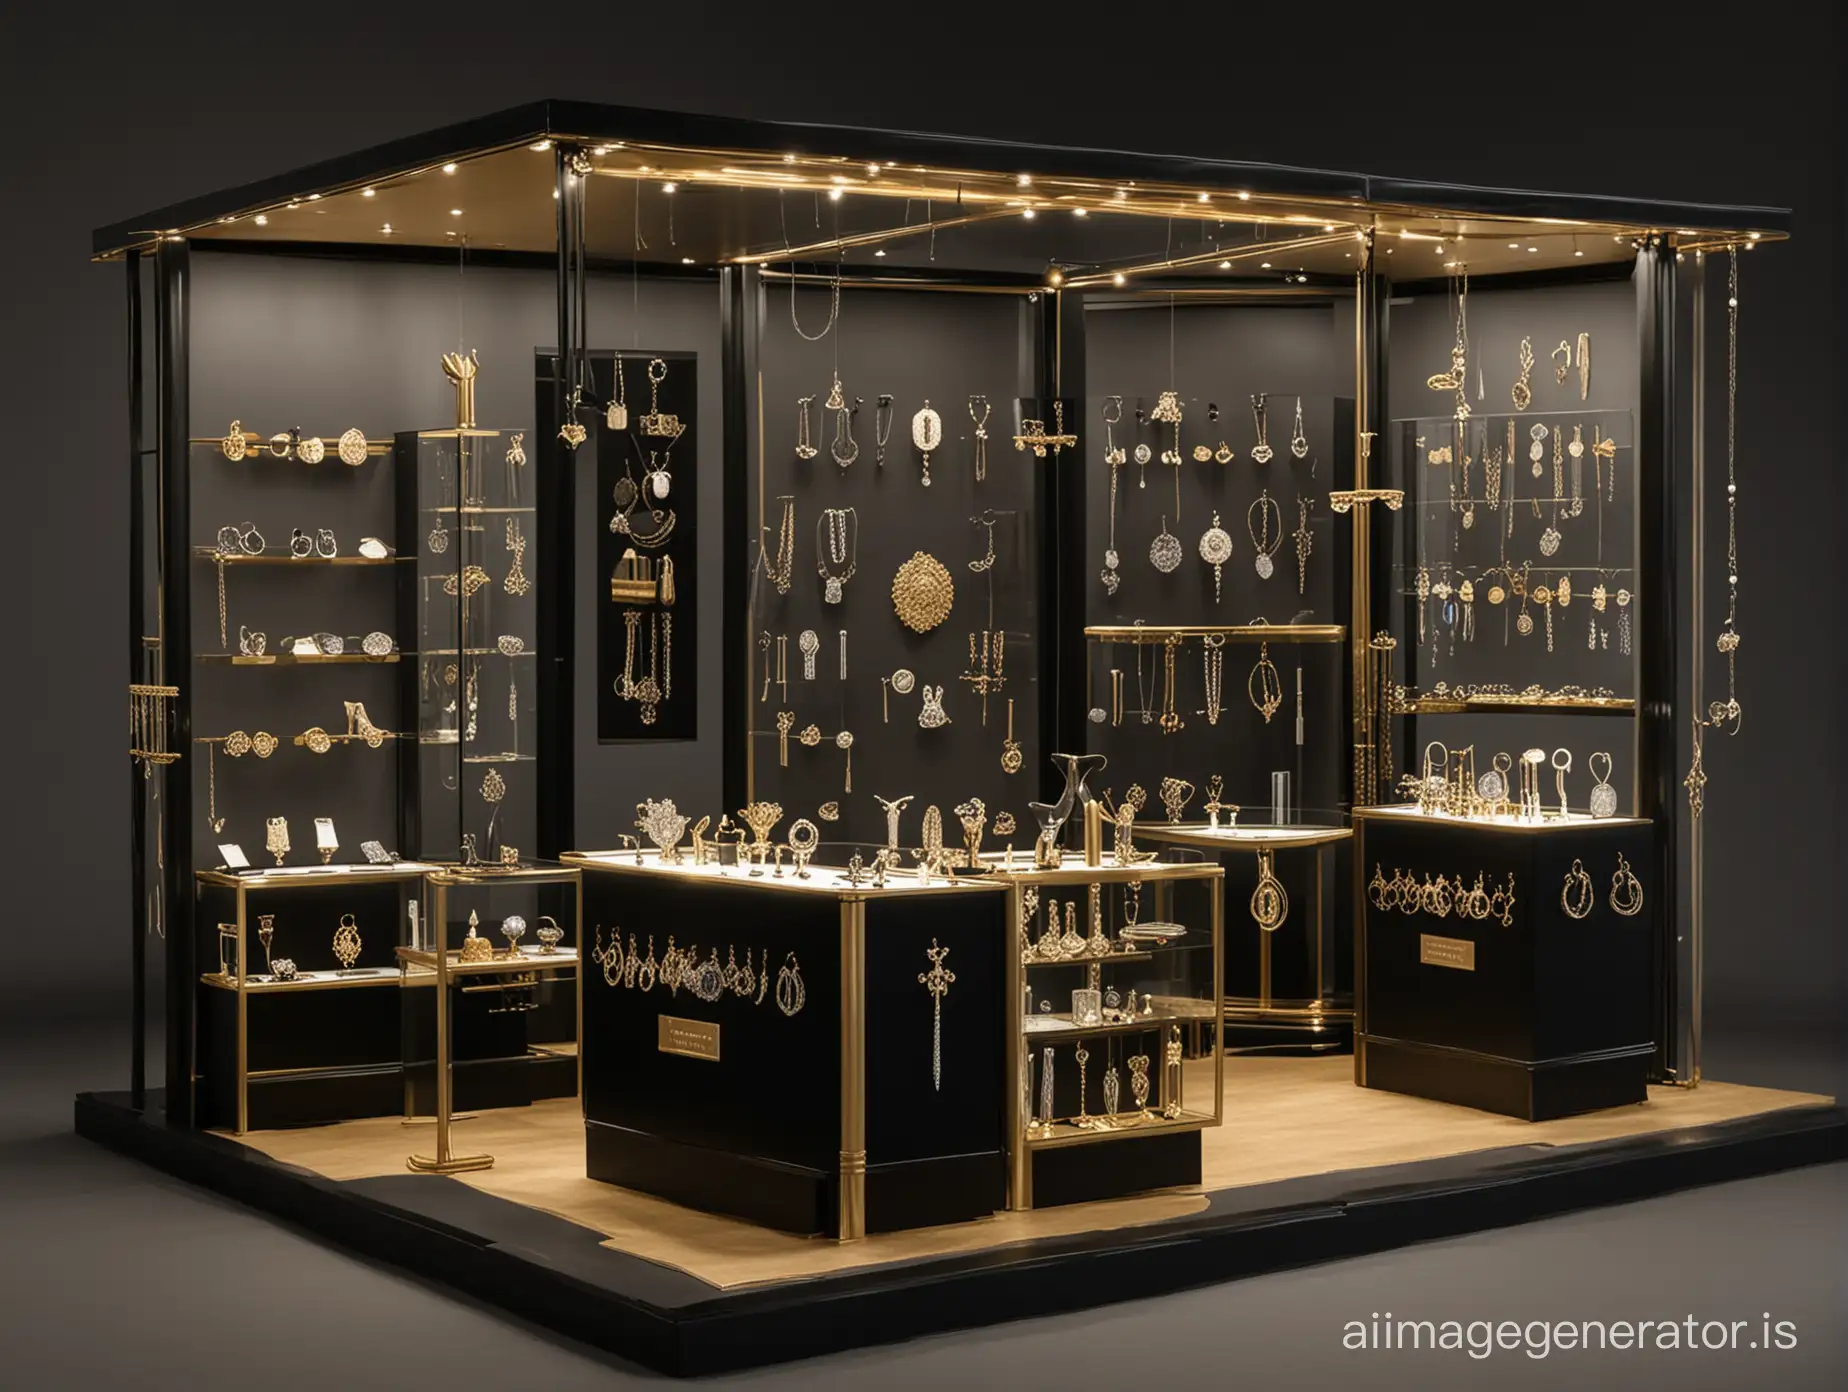 Create a stand for exhibiting jewelry in the style of Master and Margarita in black and gold colors with places for showcases and negotiation spaces.